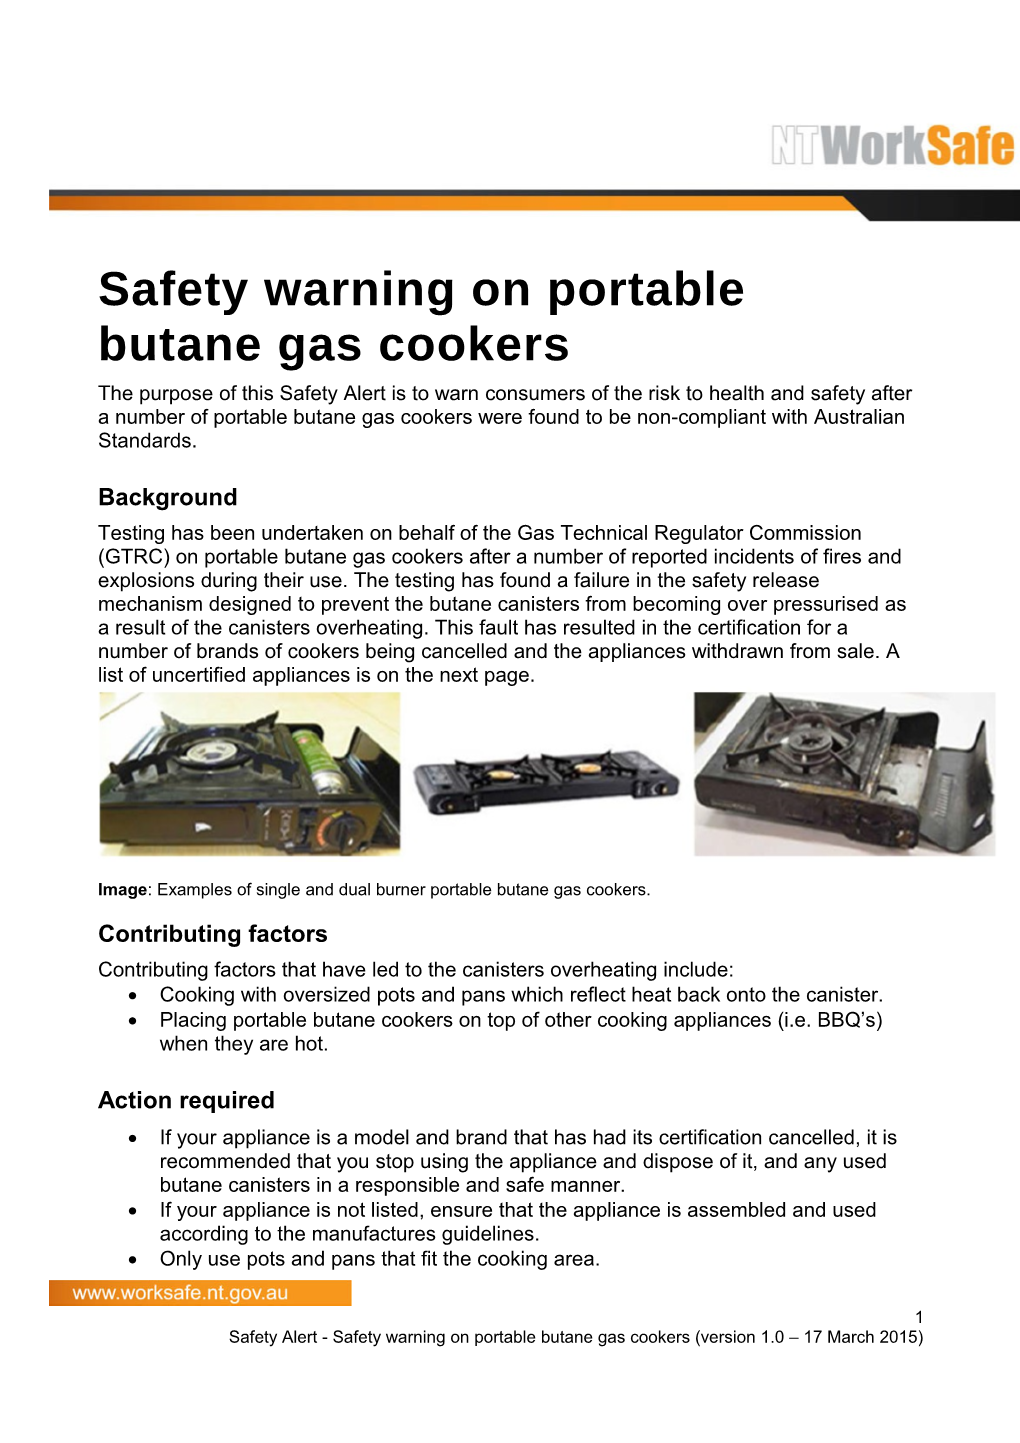 Safety Alert - Safety Warning on Portable Butane Gas Cookers